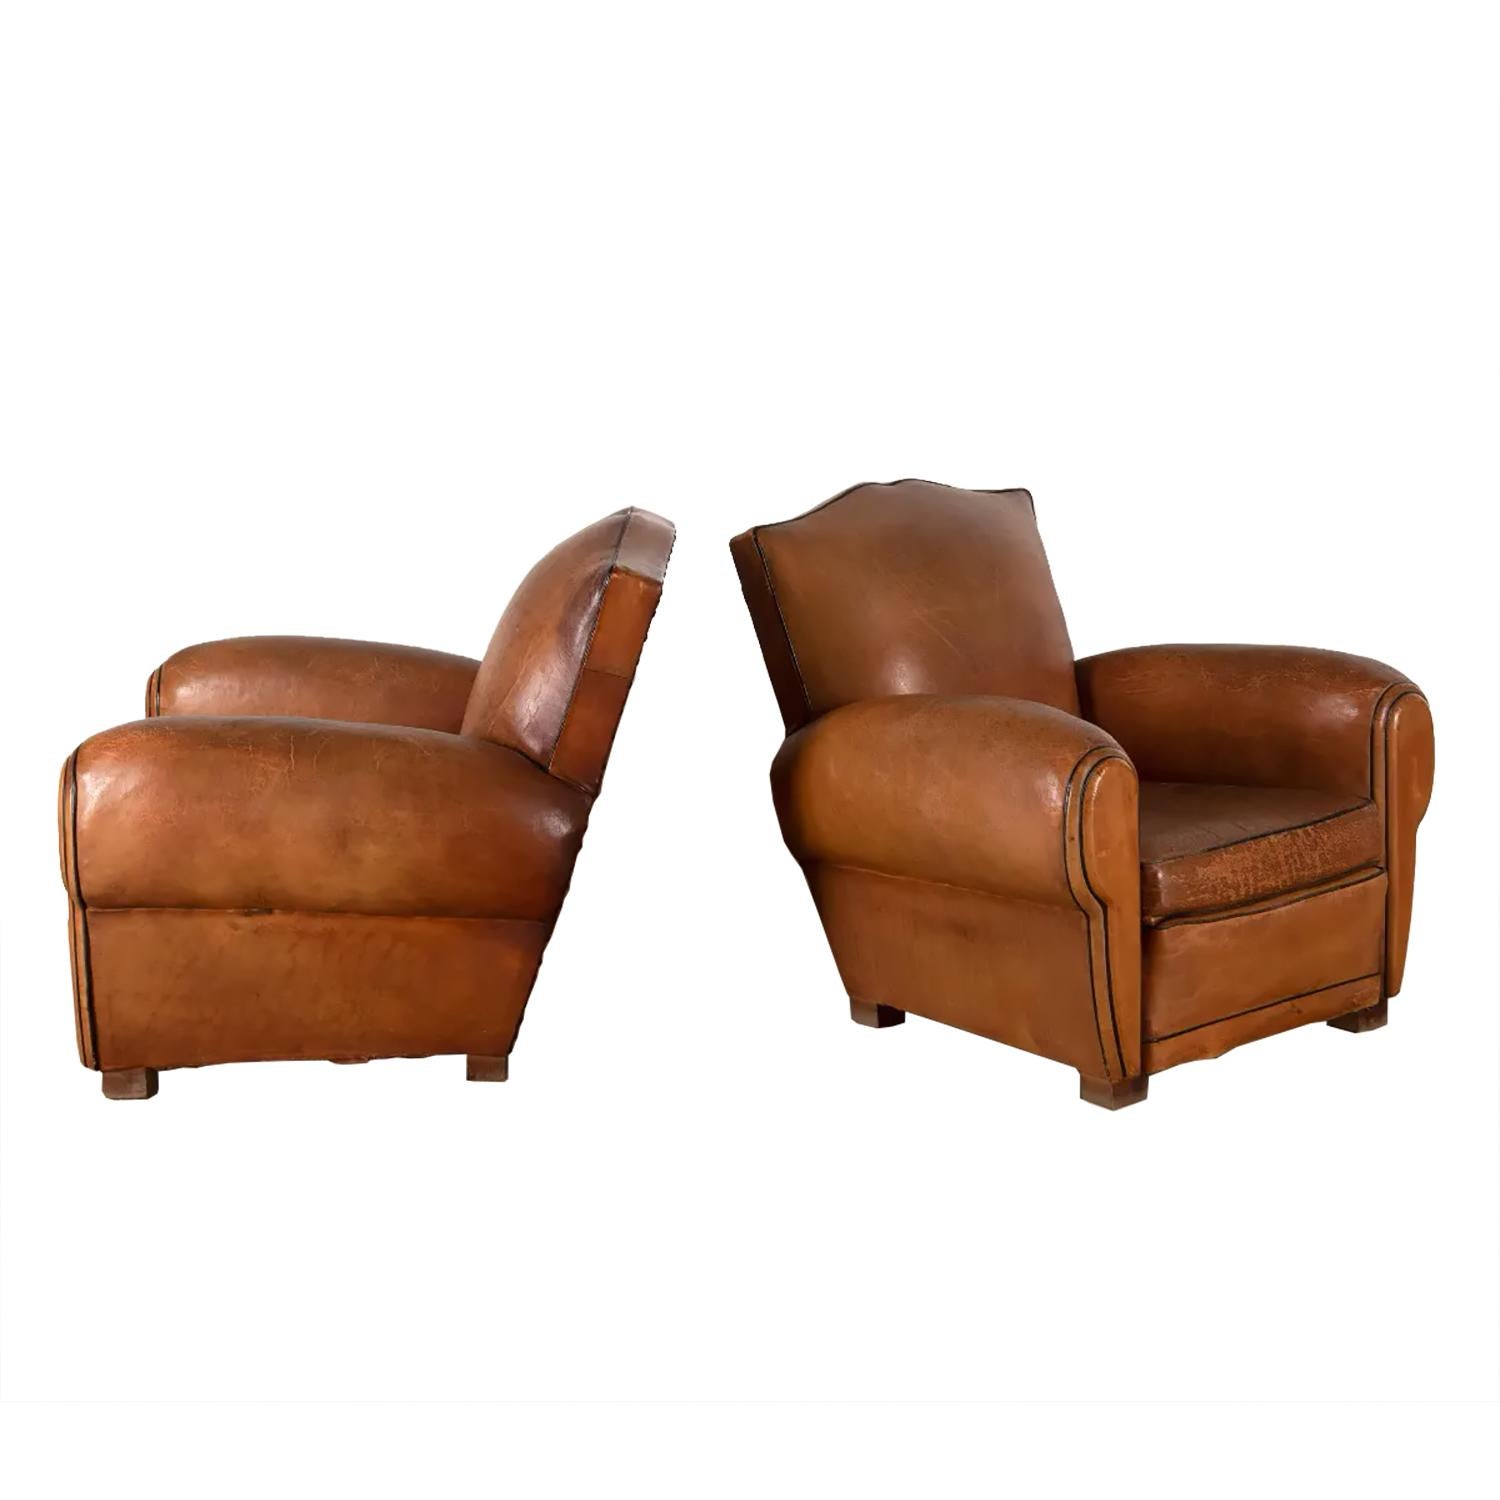 20th Century Pair of 1940s Leather Club Chairs